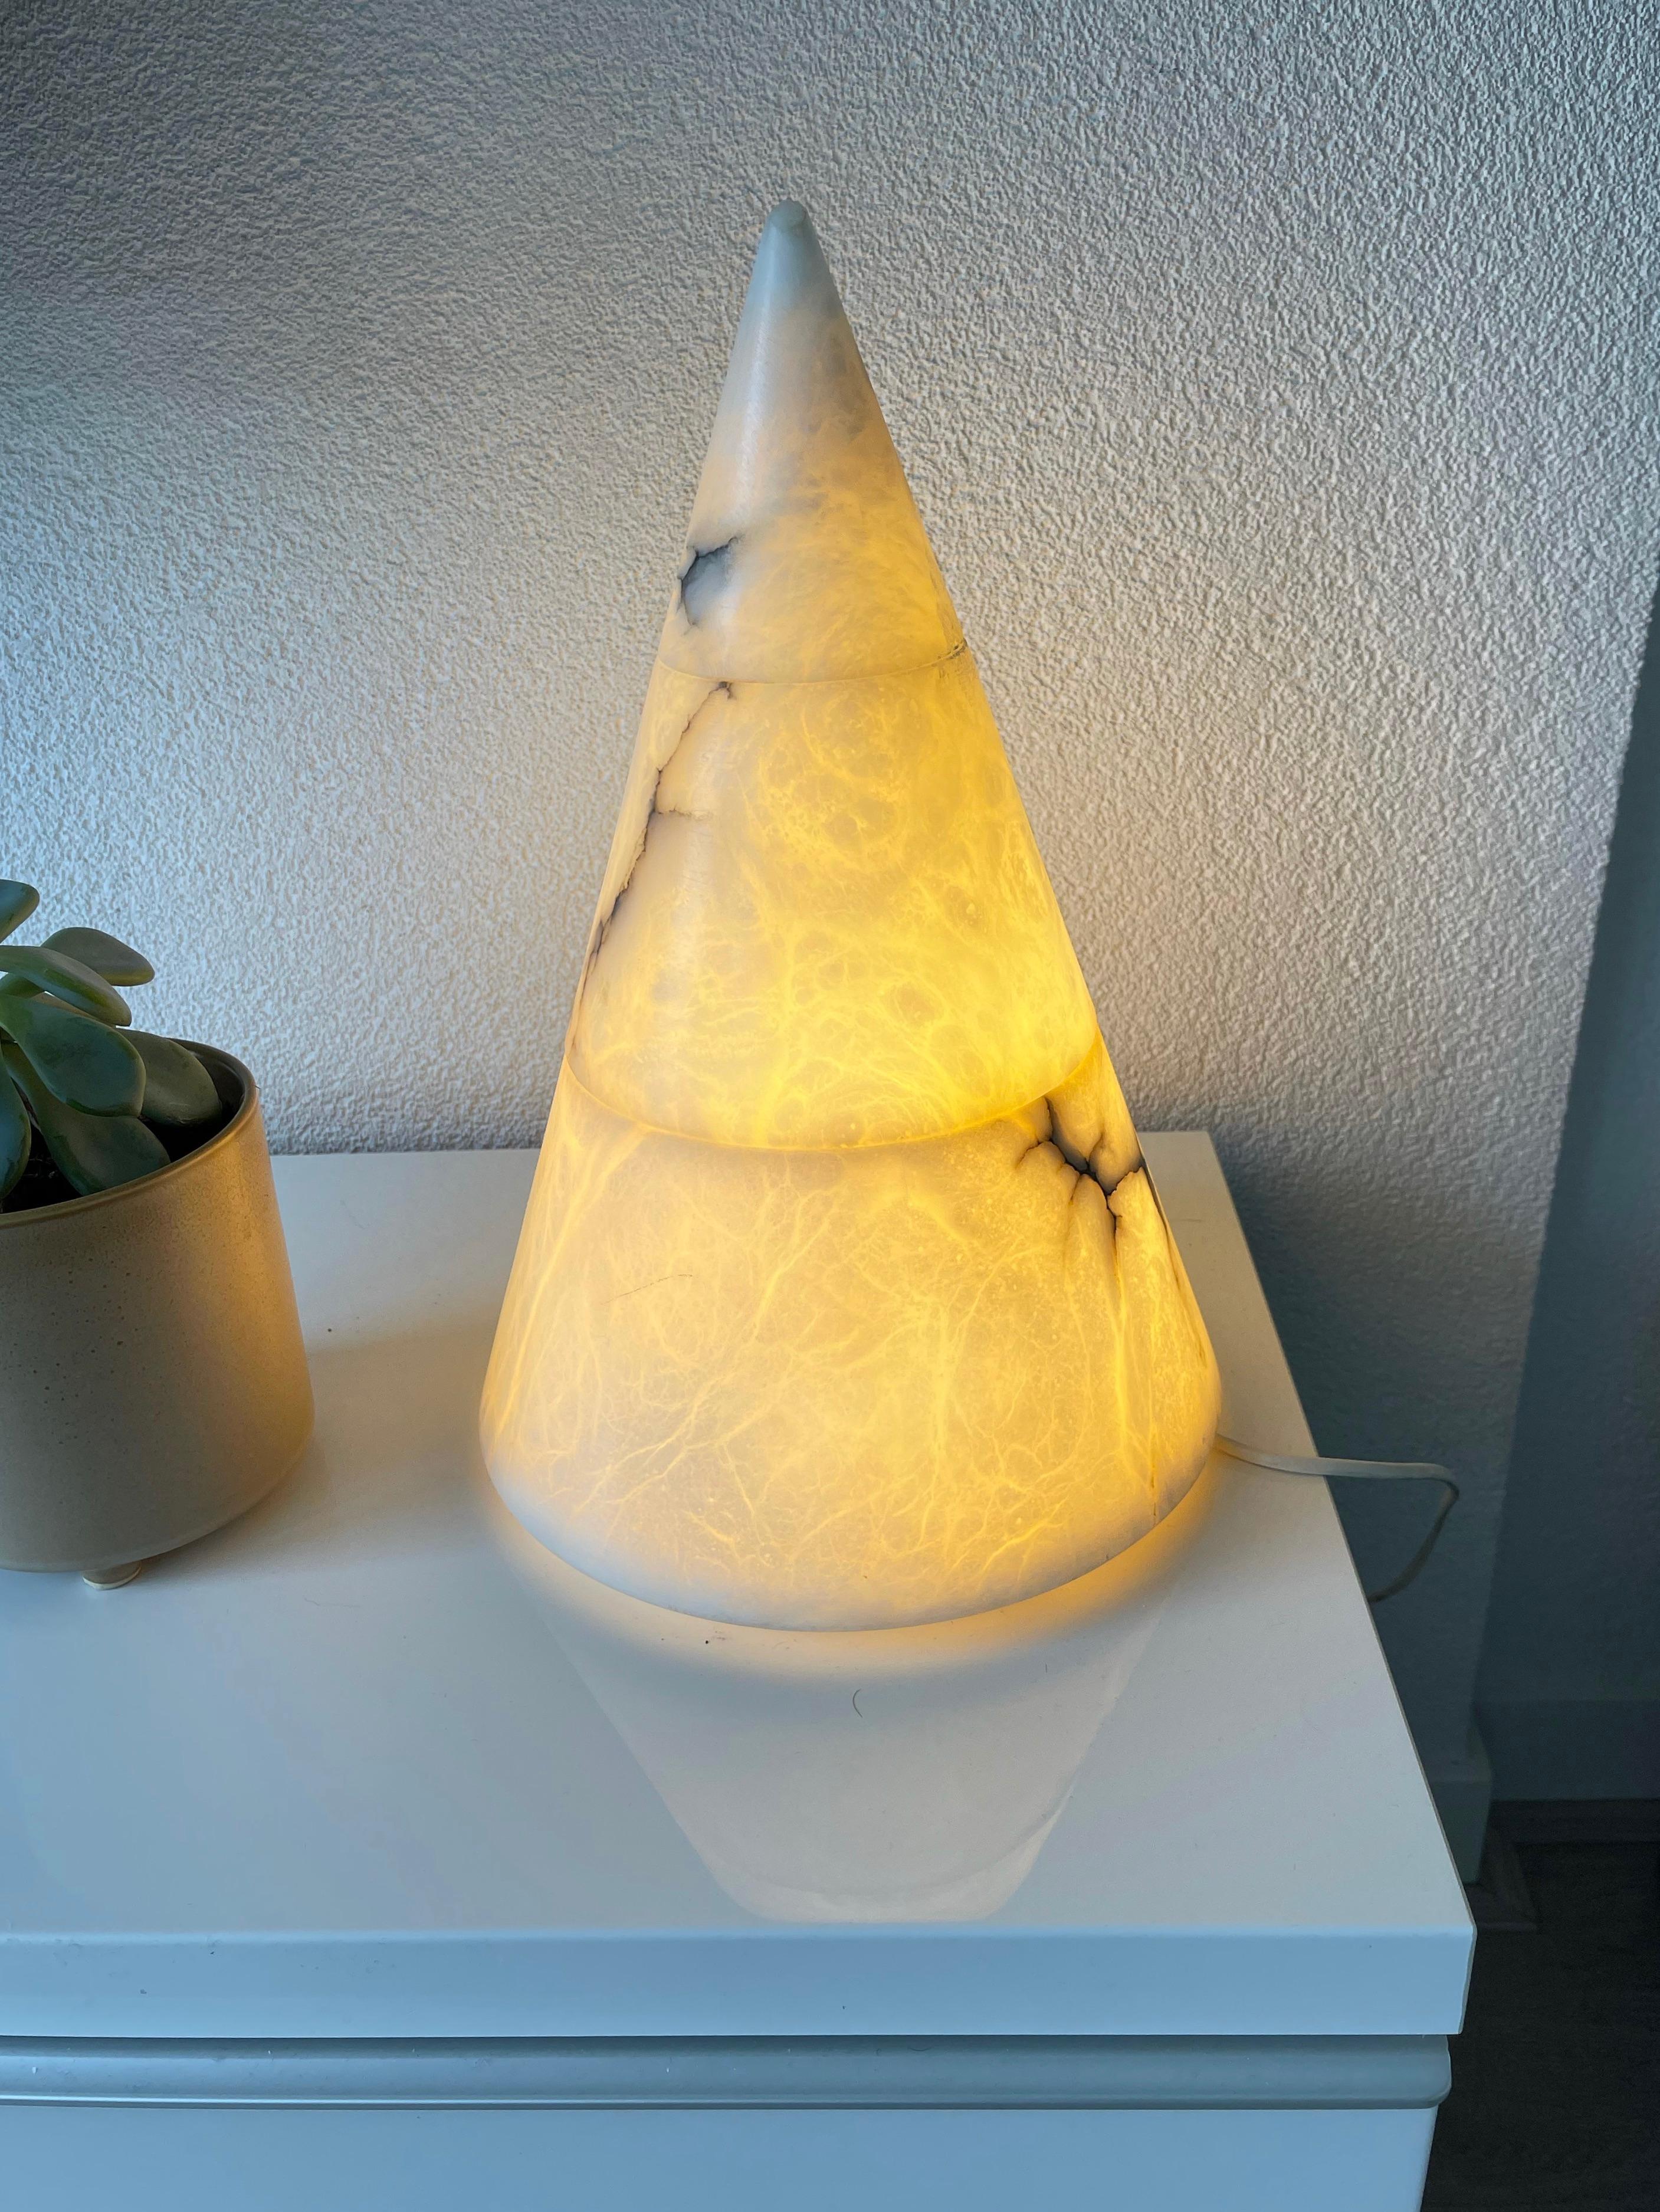 Another Mid-Century Modern Alabaster Pyramid Design and Conical Shape Table Lamp For Sale 5